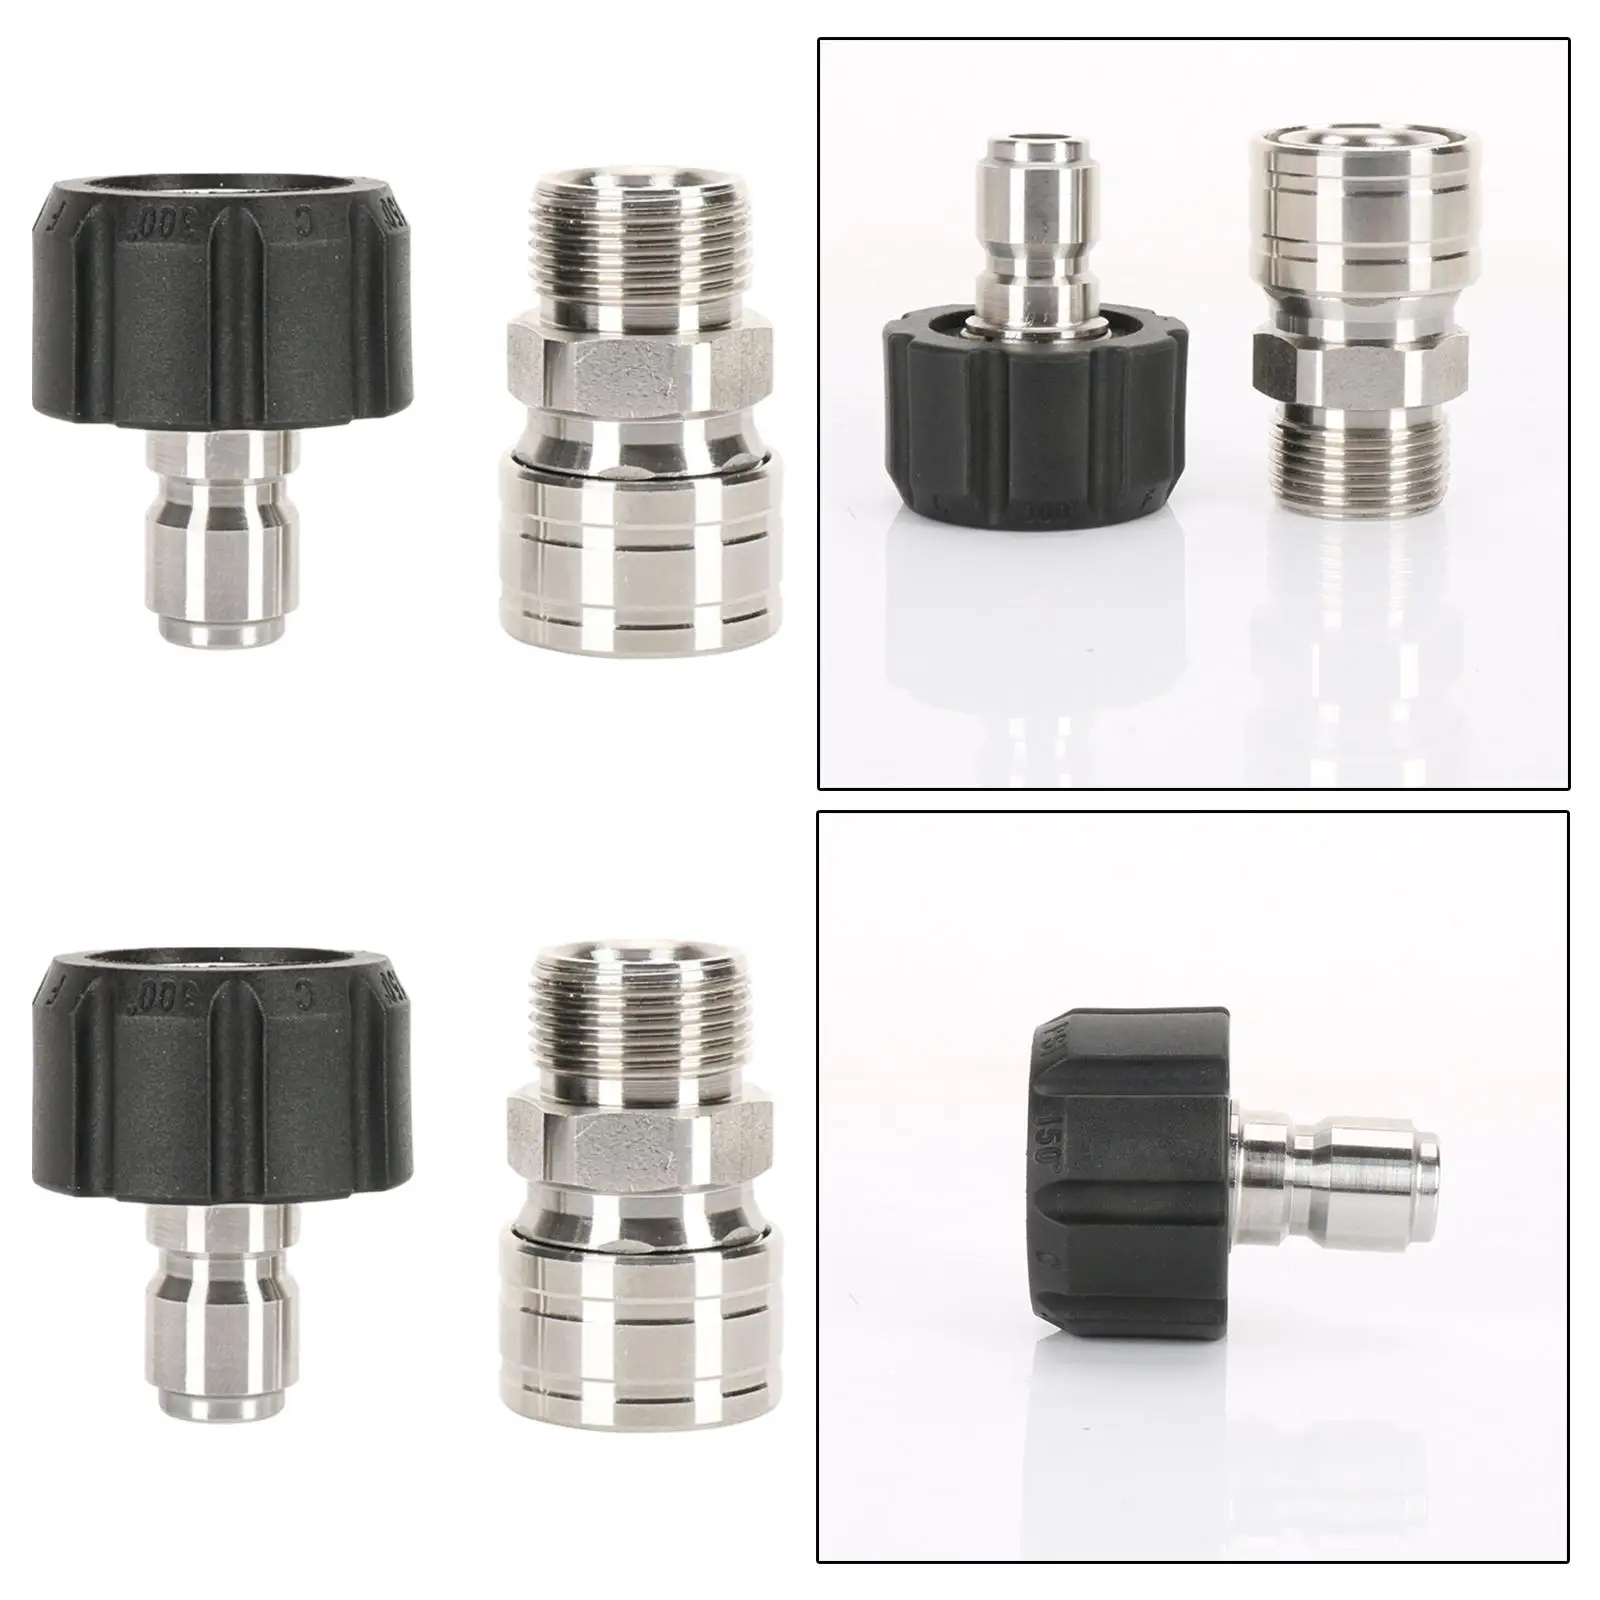 2pcs High Pressure Washer Connector M22 Thread to 3/8` Quick Connector Internal Thread Hose Pipe Connecting Parts